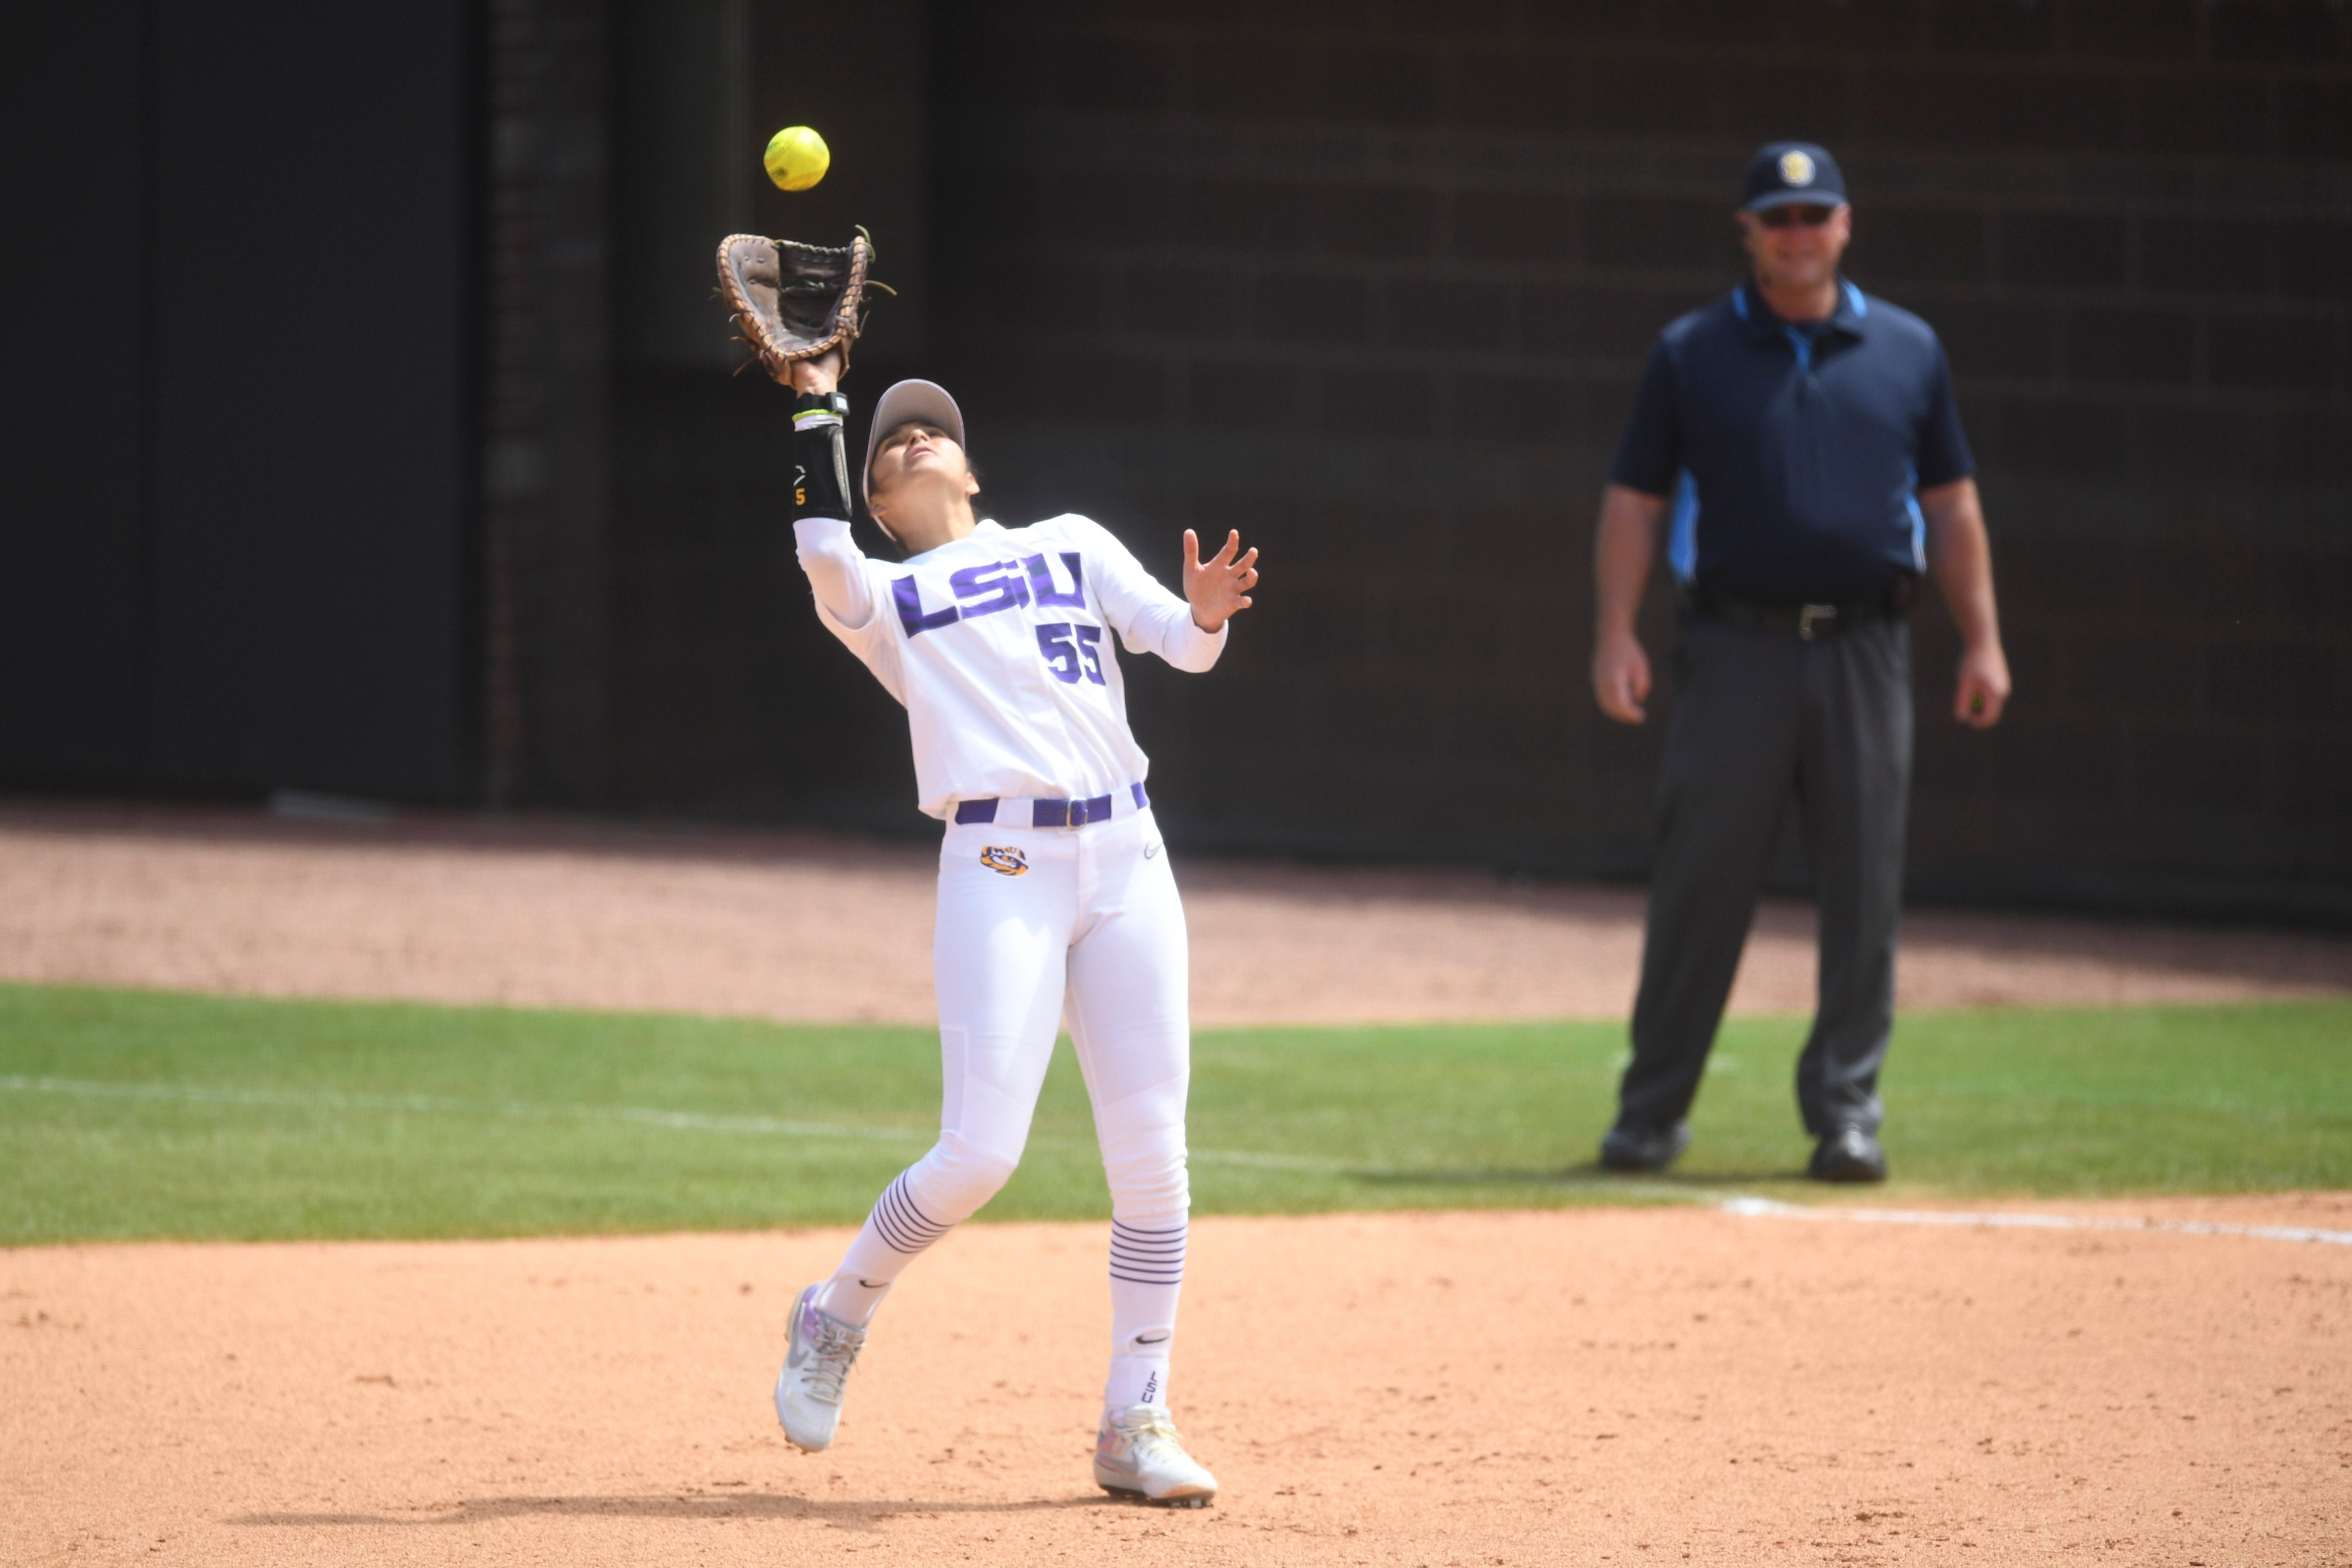 What to know about LSU softball regional in Baton Rouge: TV, times, tickets, parking